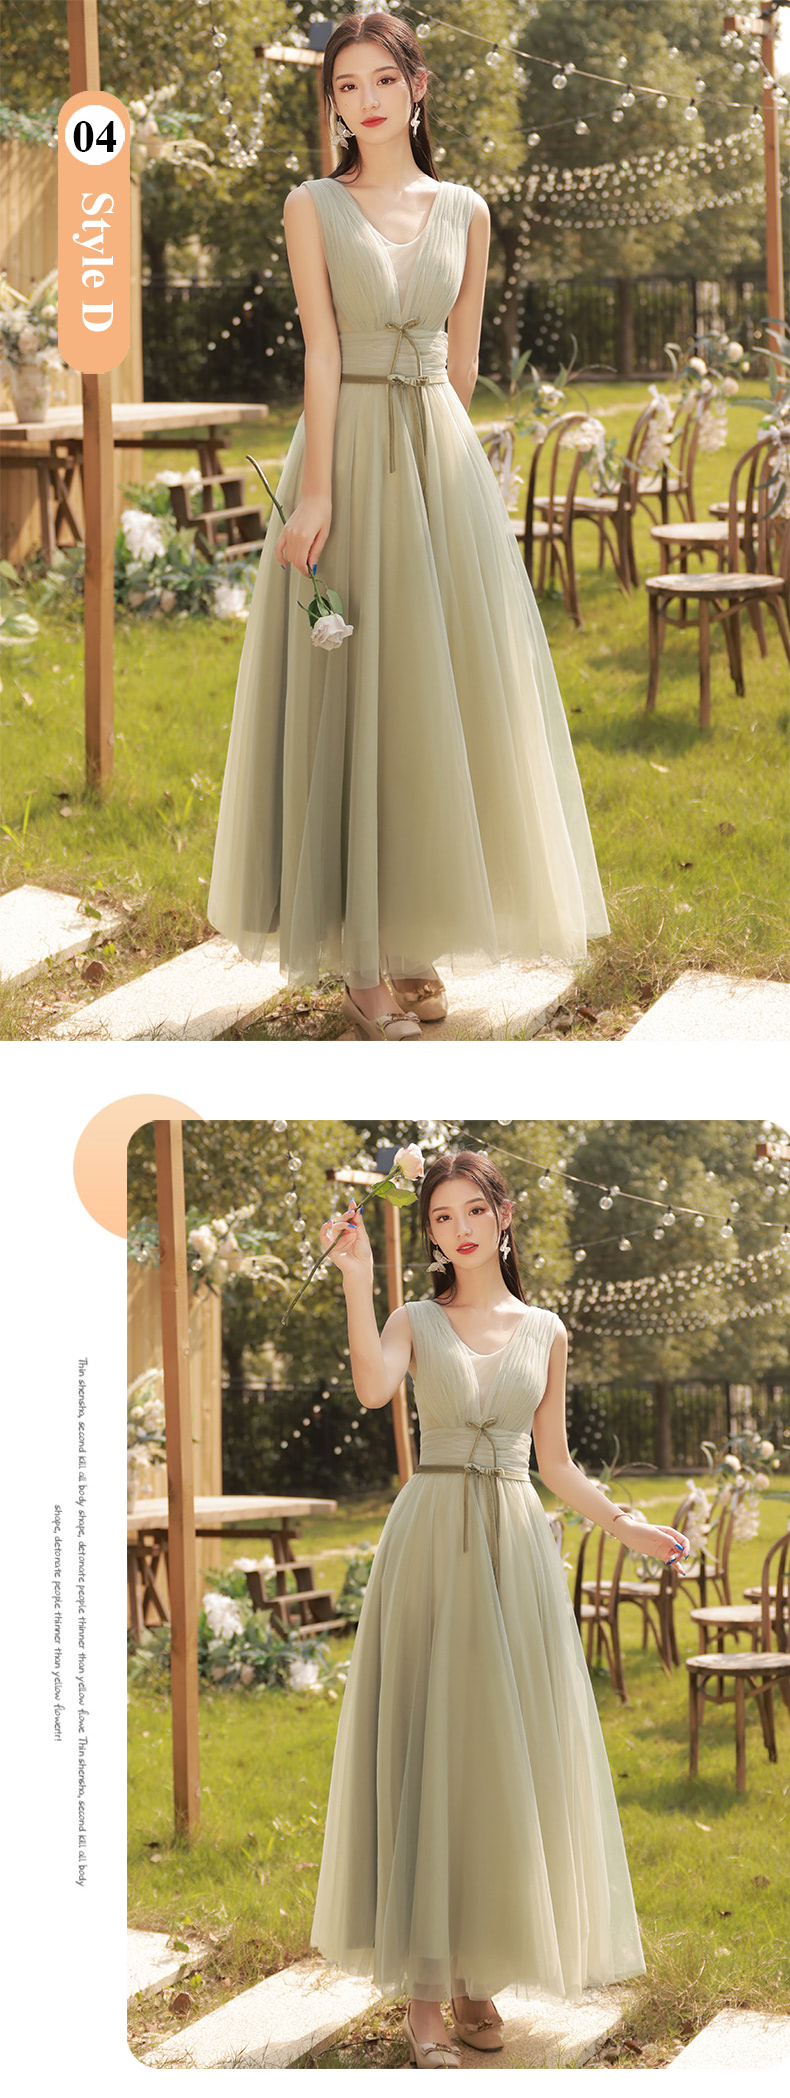 A-line-Green-Tulle-Bridesmaid-Gown-Bridal-Party-Long-Dress20.jpg